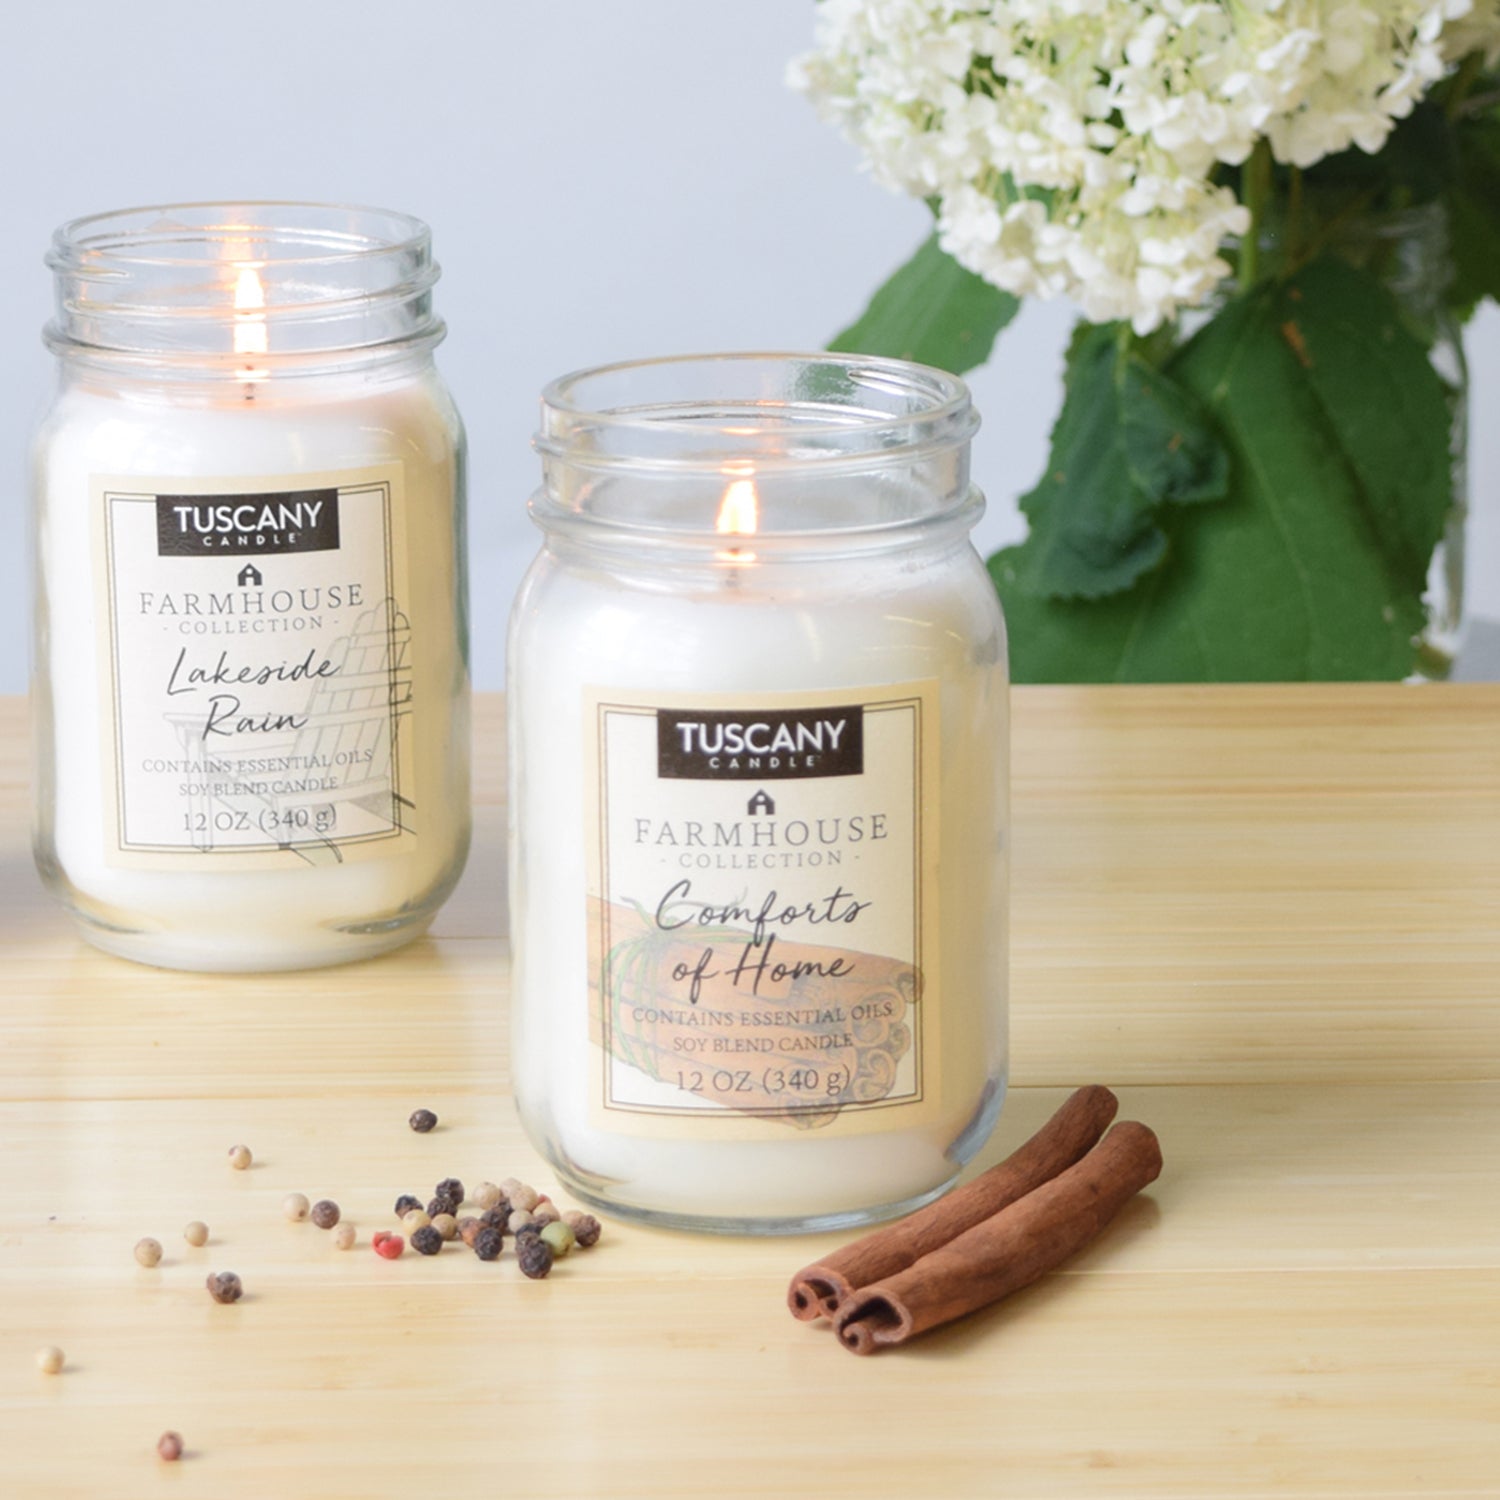 A Tuscany Candle farmhouse collection of scented candles, including one Lakeside Rain Scented Jar Candle (12 oz) – Farmhouse Collection, beautifully displayed on a wooden table.